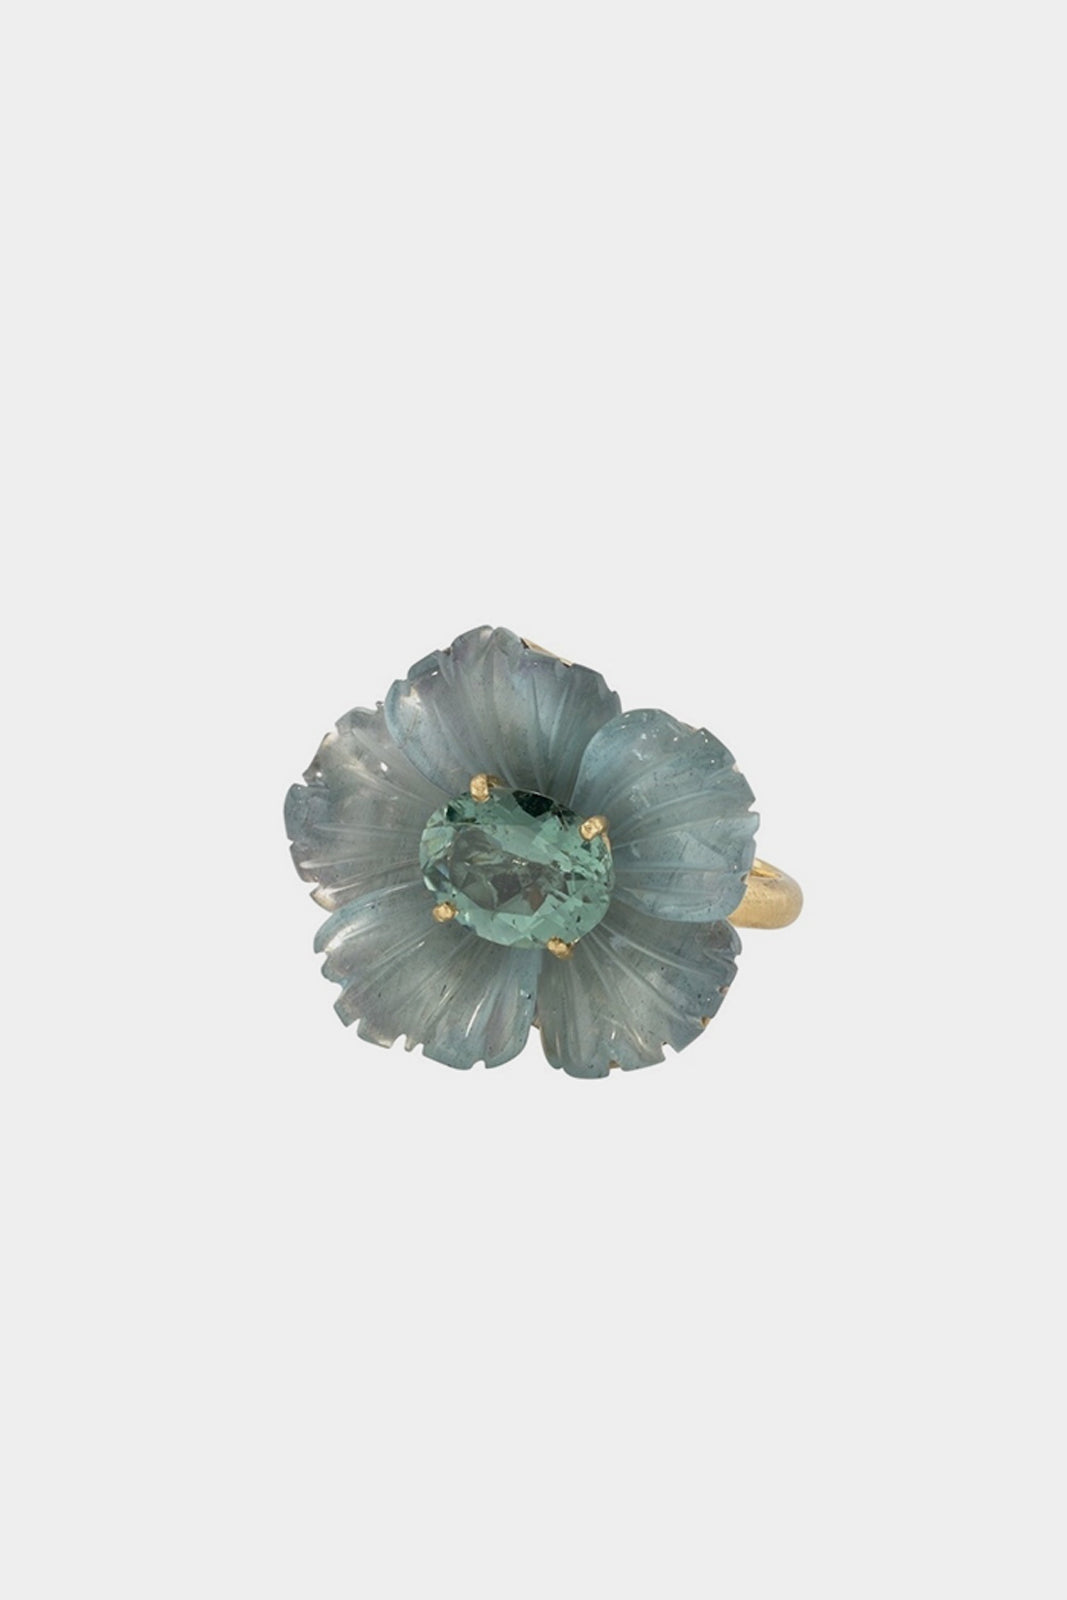 18K Yellow Gold Tropical Flower Ring with Carved Aquamarine and Tourmaline Center